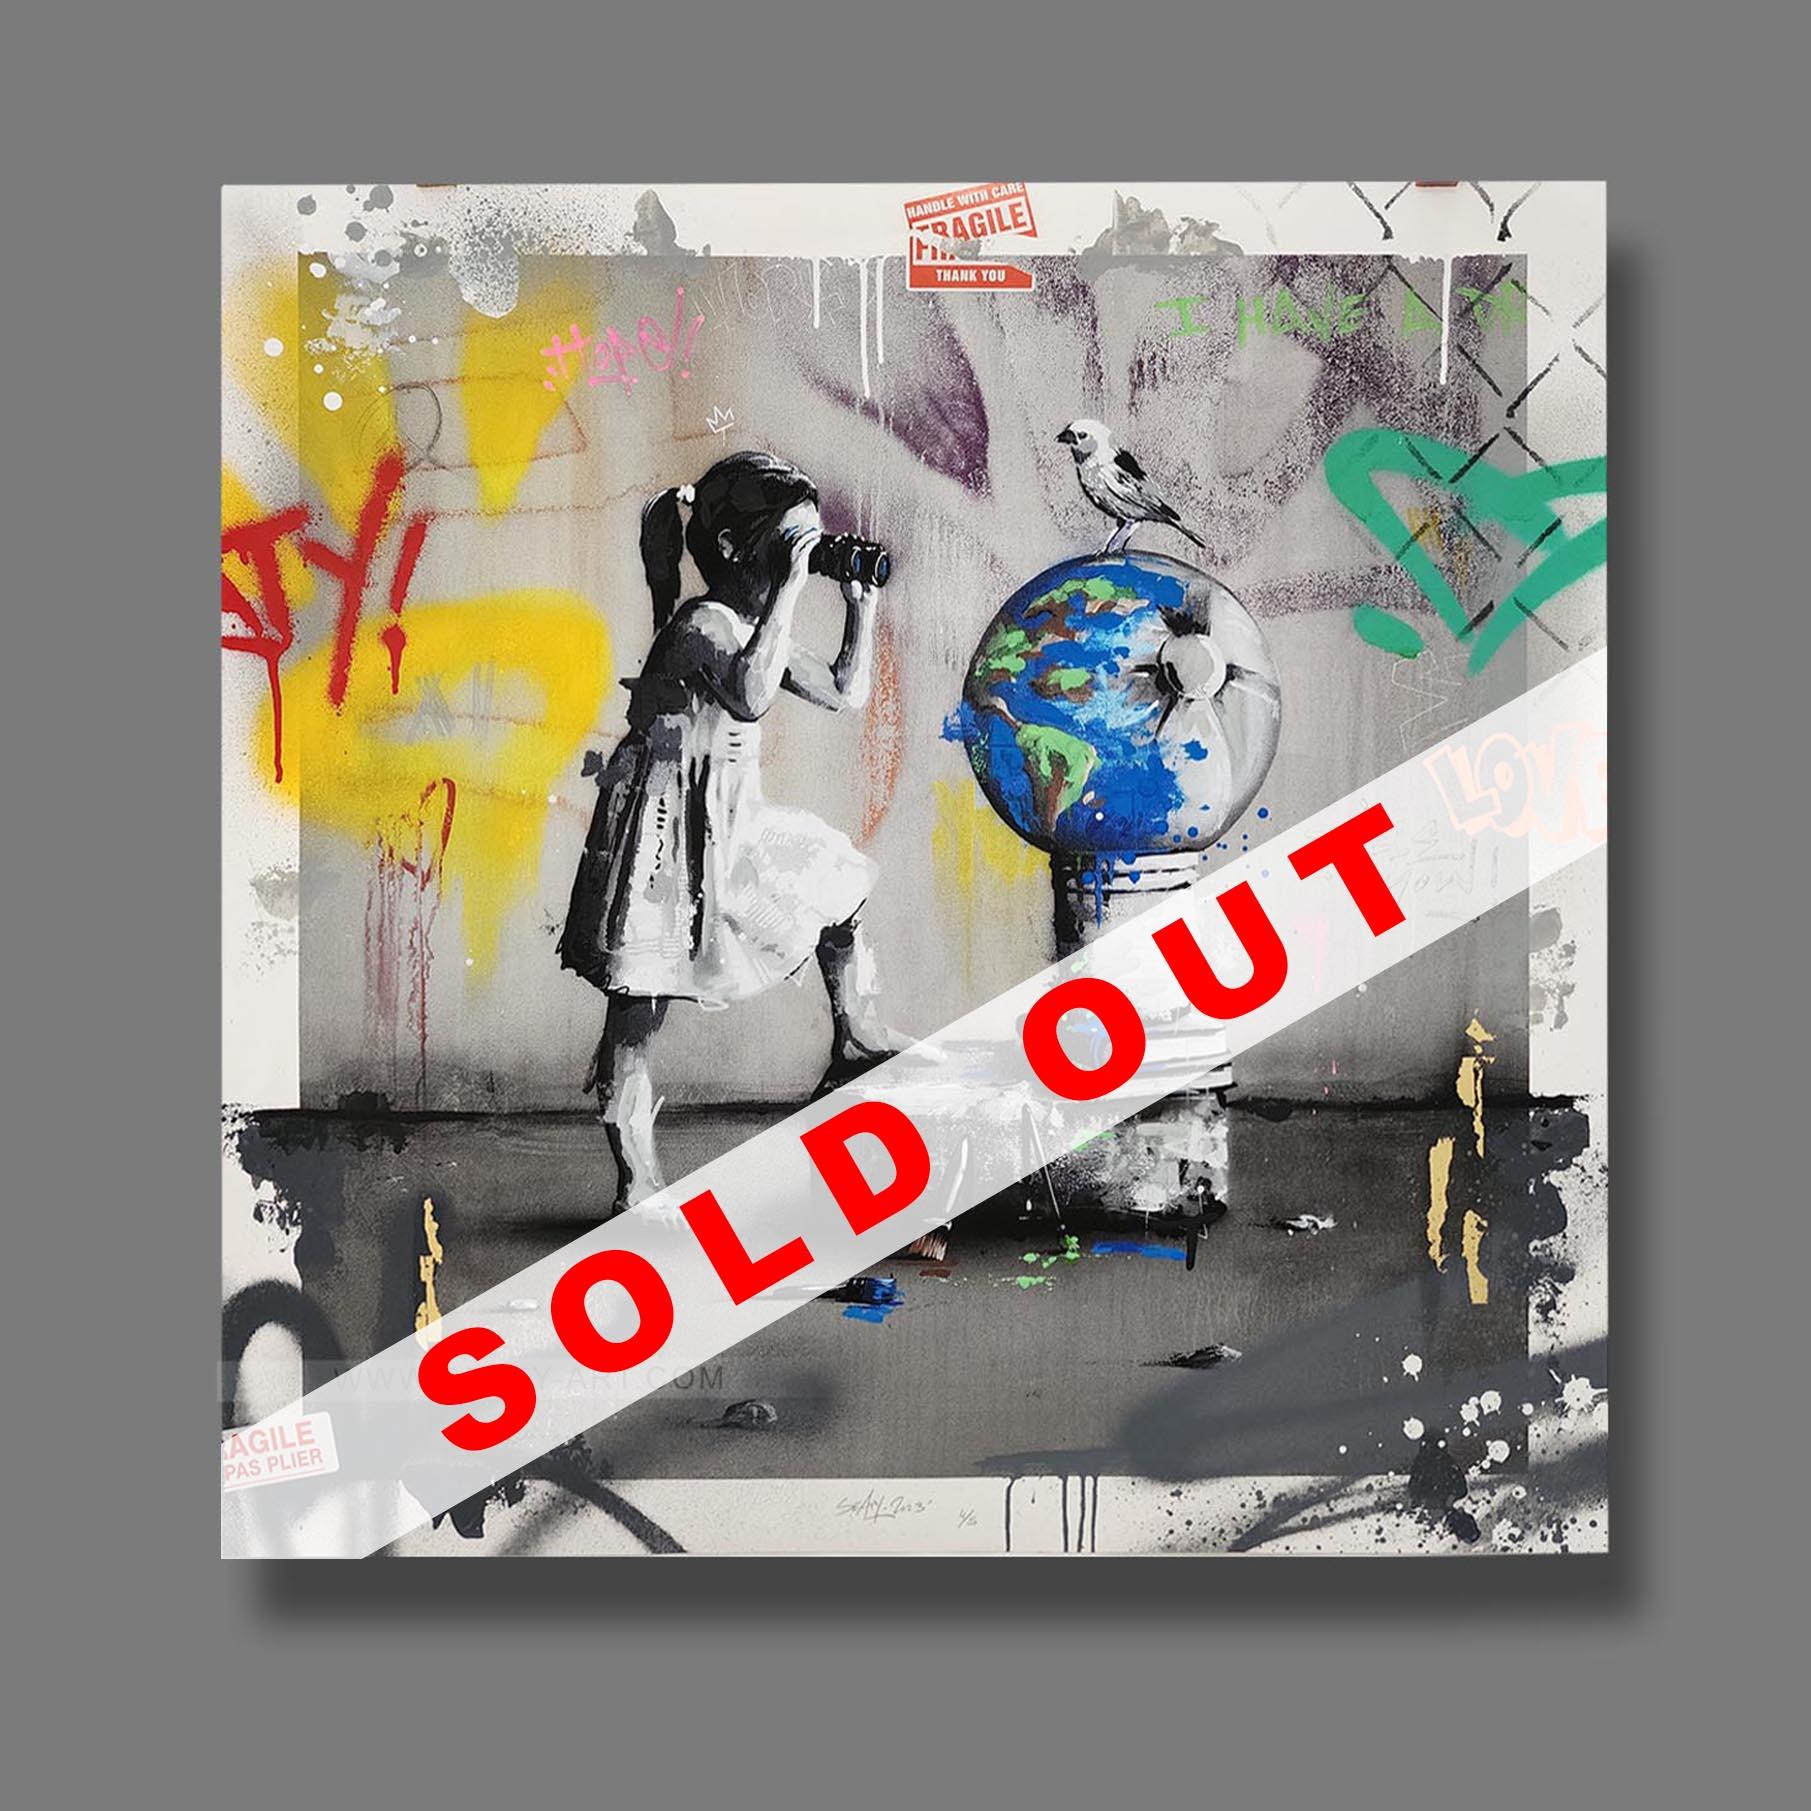 Sold out site 6